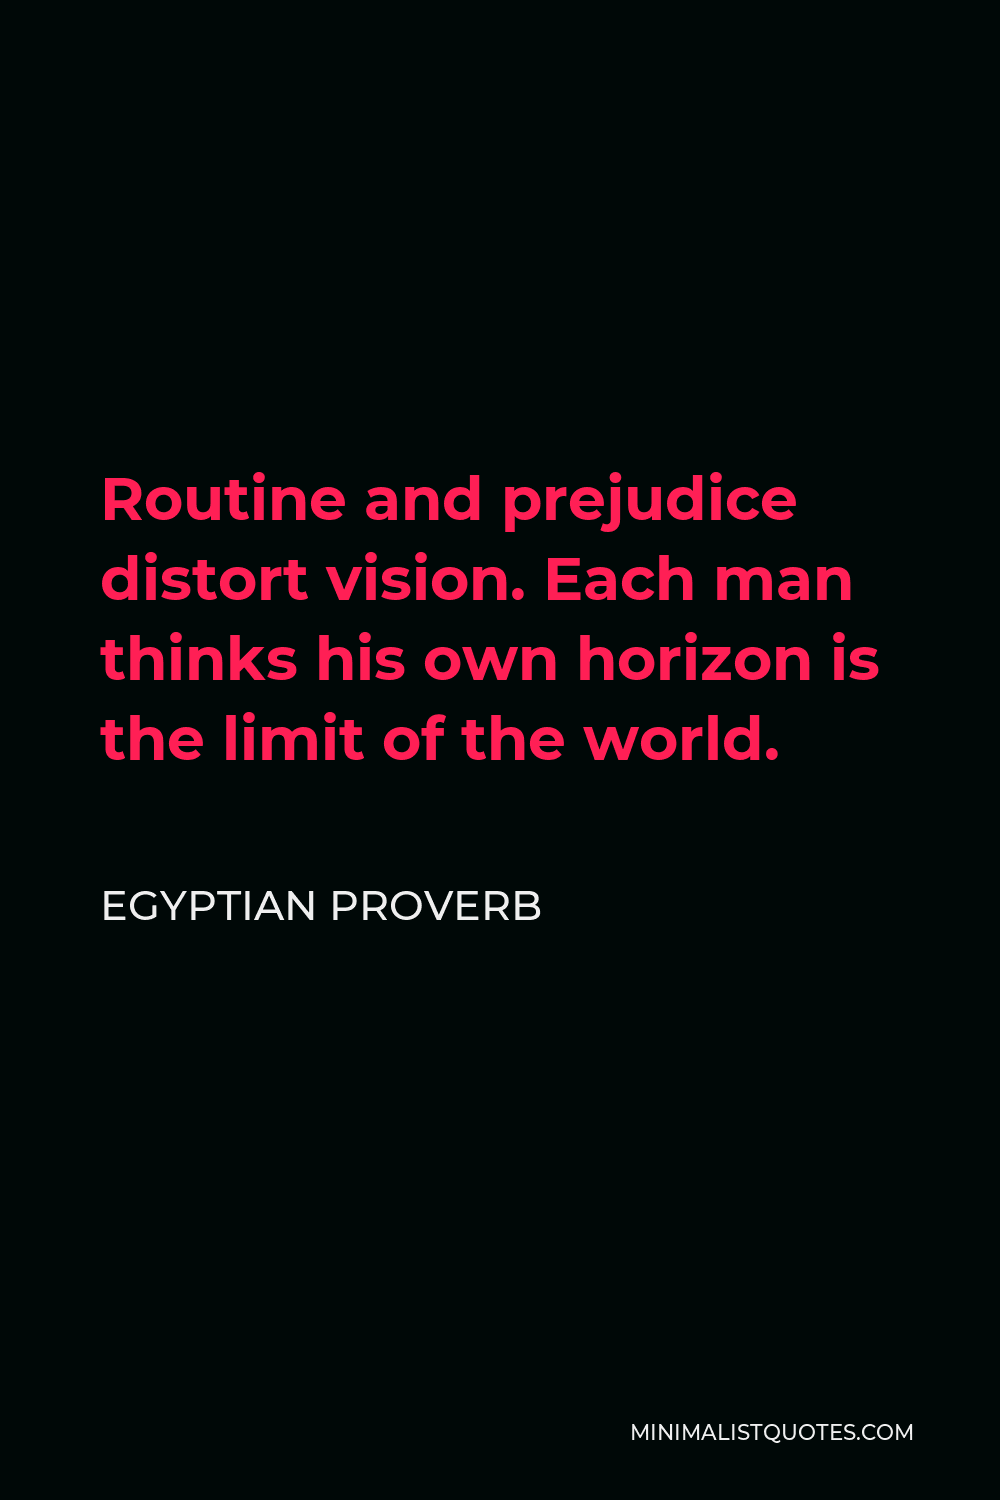 Egyptian Proverb Quote - Routine and prejudice distort vision. Each man thinks his own horizon is the limit of the world.